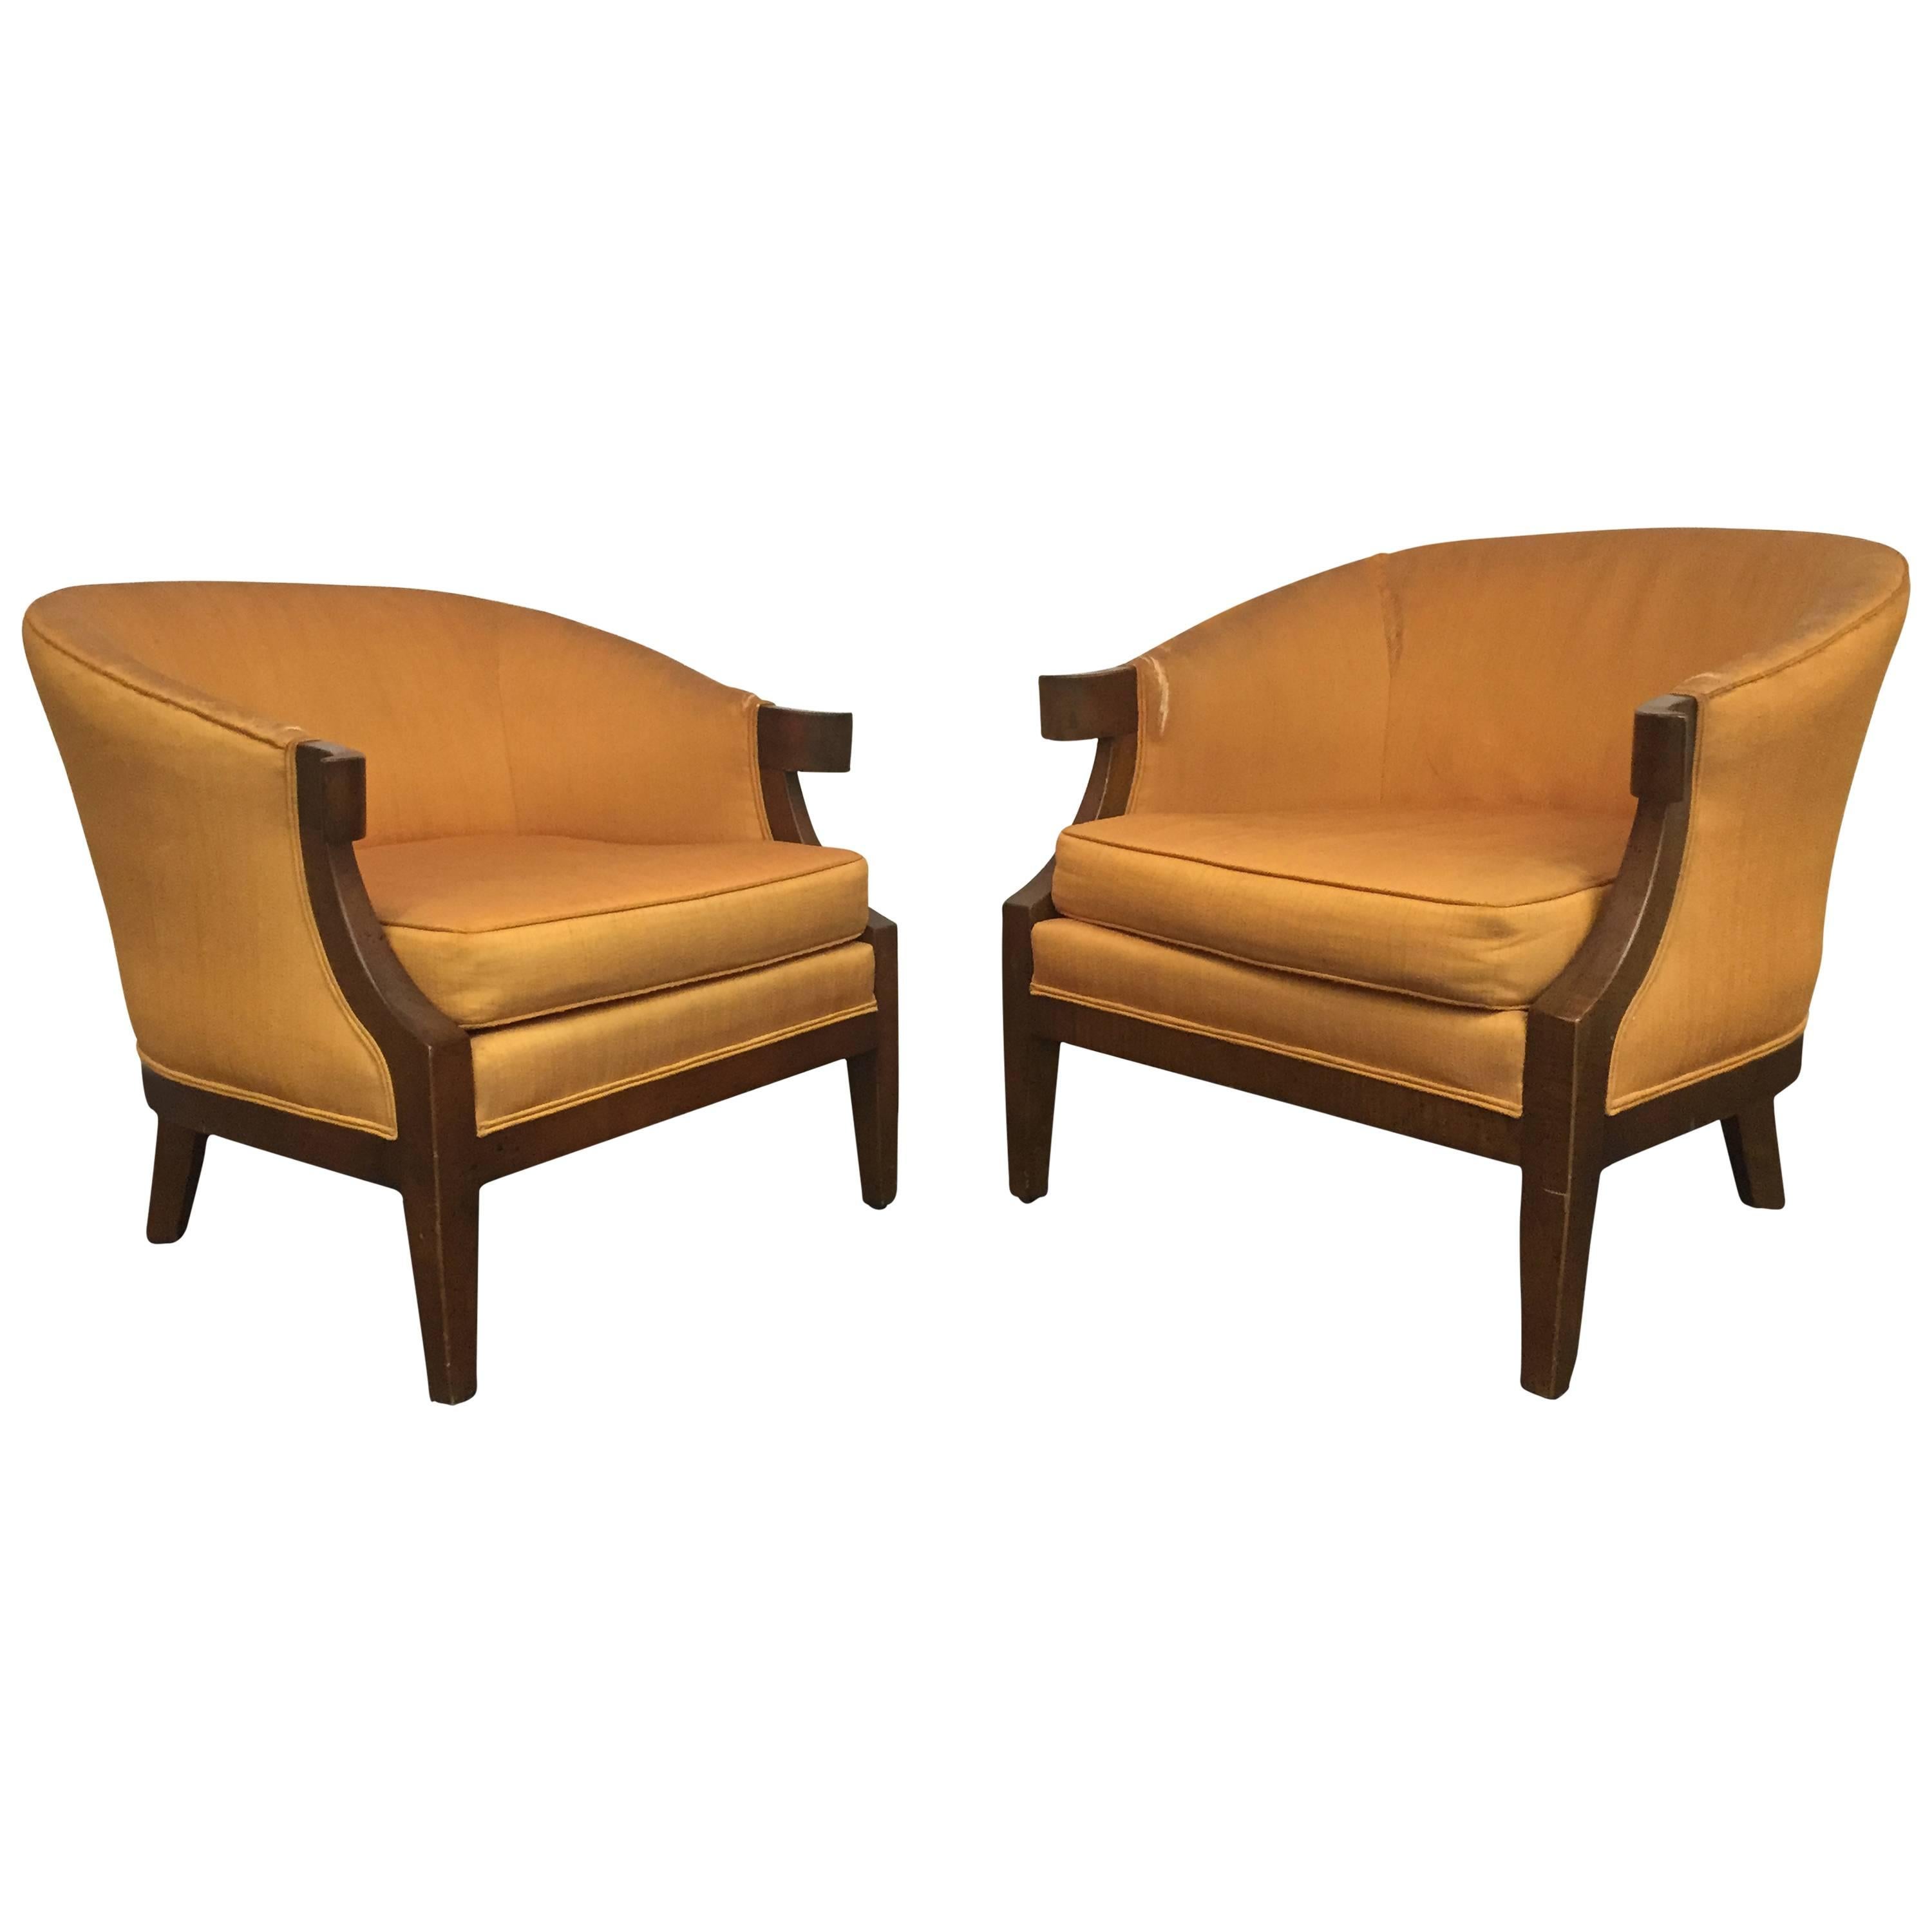 Pair of Art Deco Slipper Chairs in the Manner of Tommi Parzinger For Sale